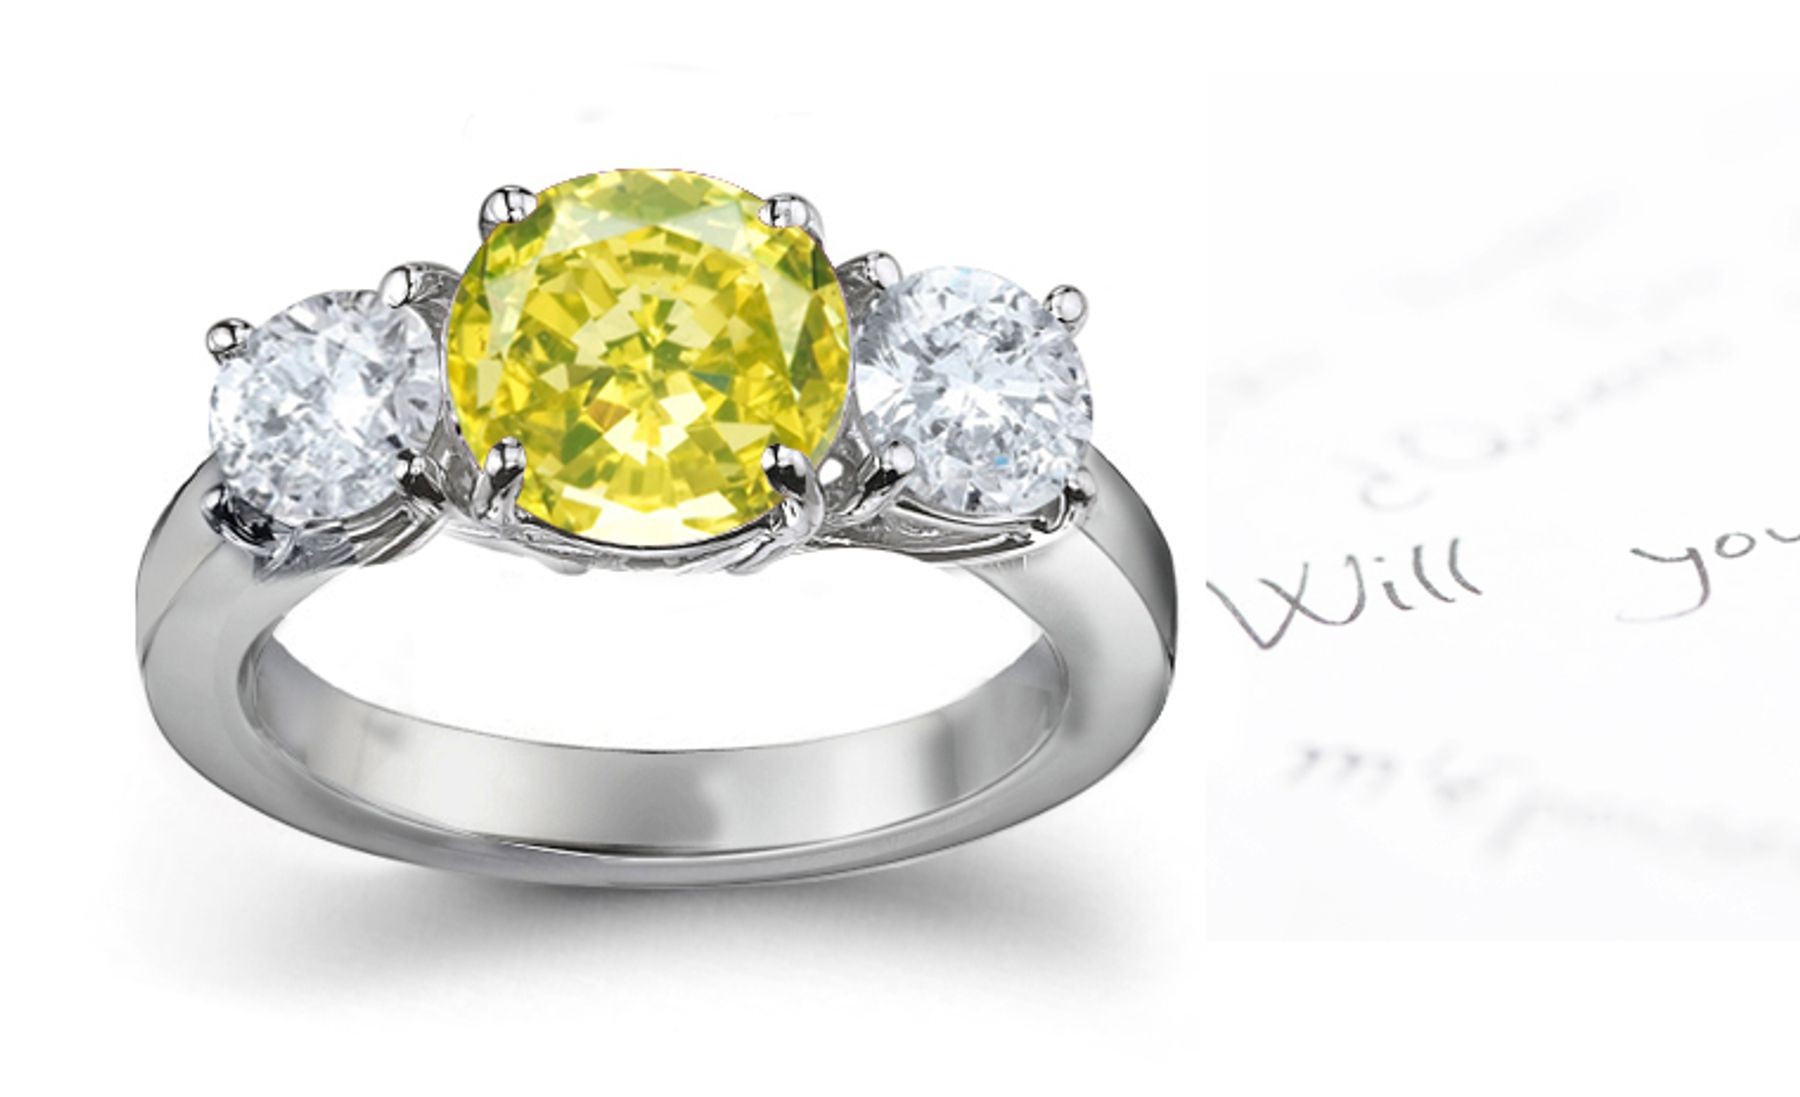 Premier Colored Diamonds Designer Collection - Yellow Colored Diamonds & White Diamonds Fancy Diamond Three Stone Engagement Rings